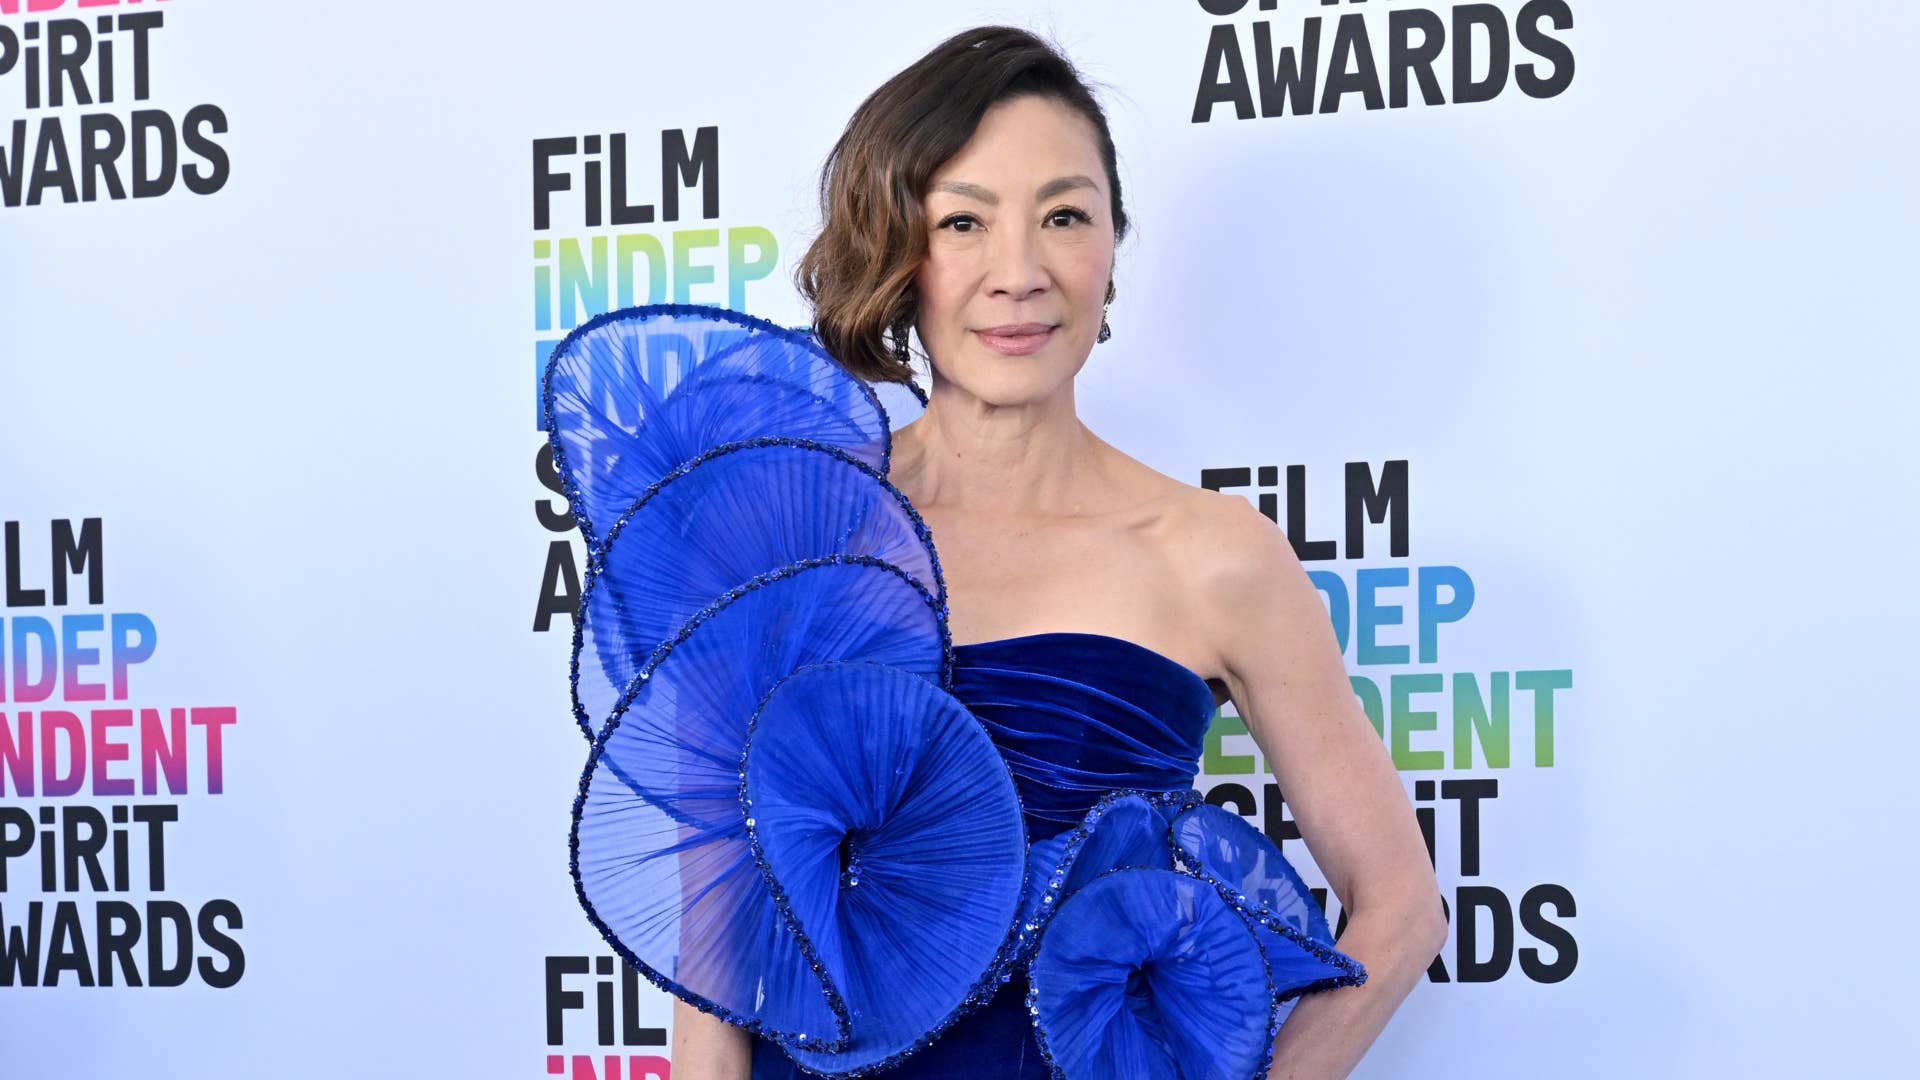 Michelle Yeoh is seen at awards show